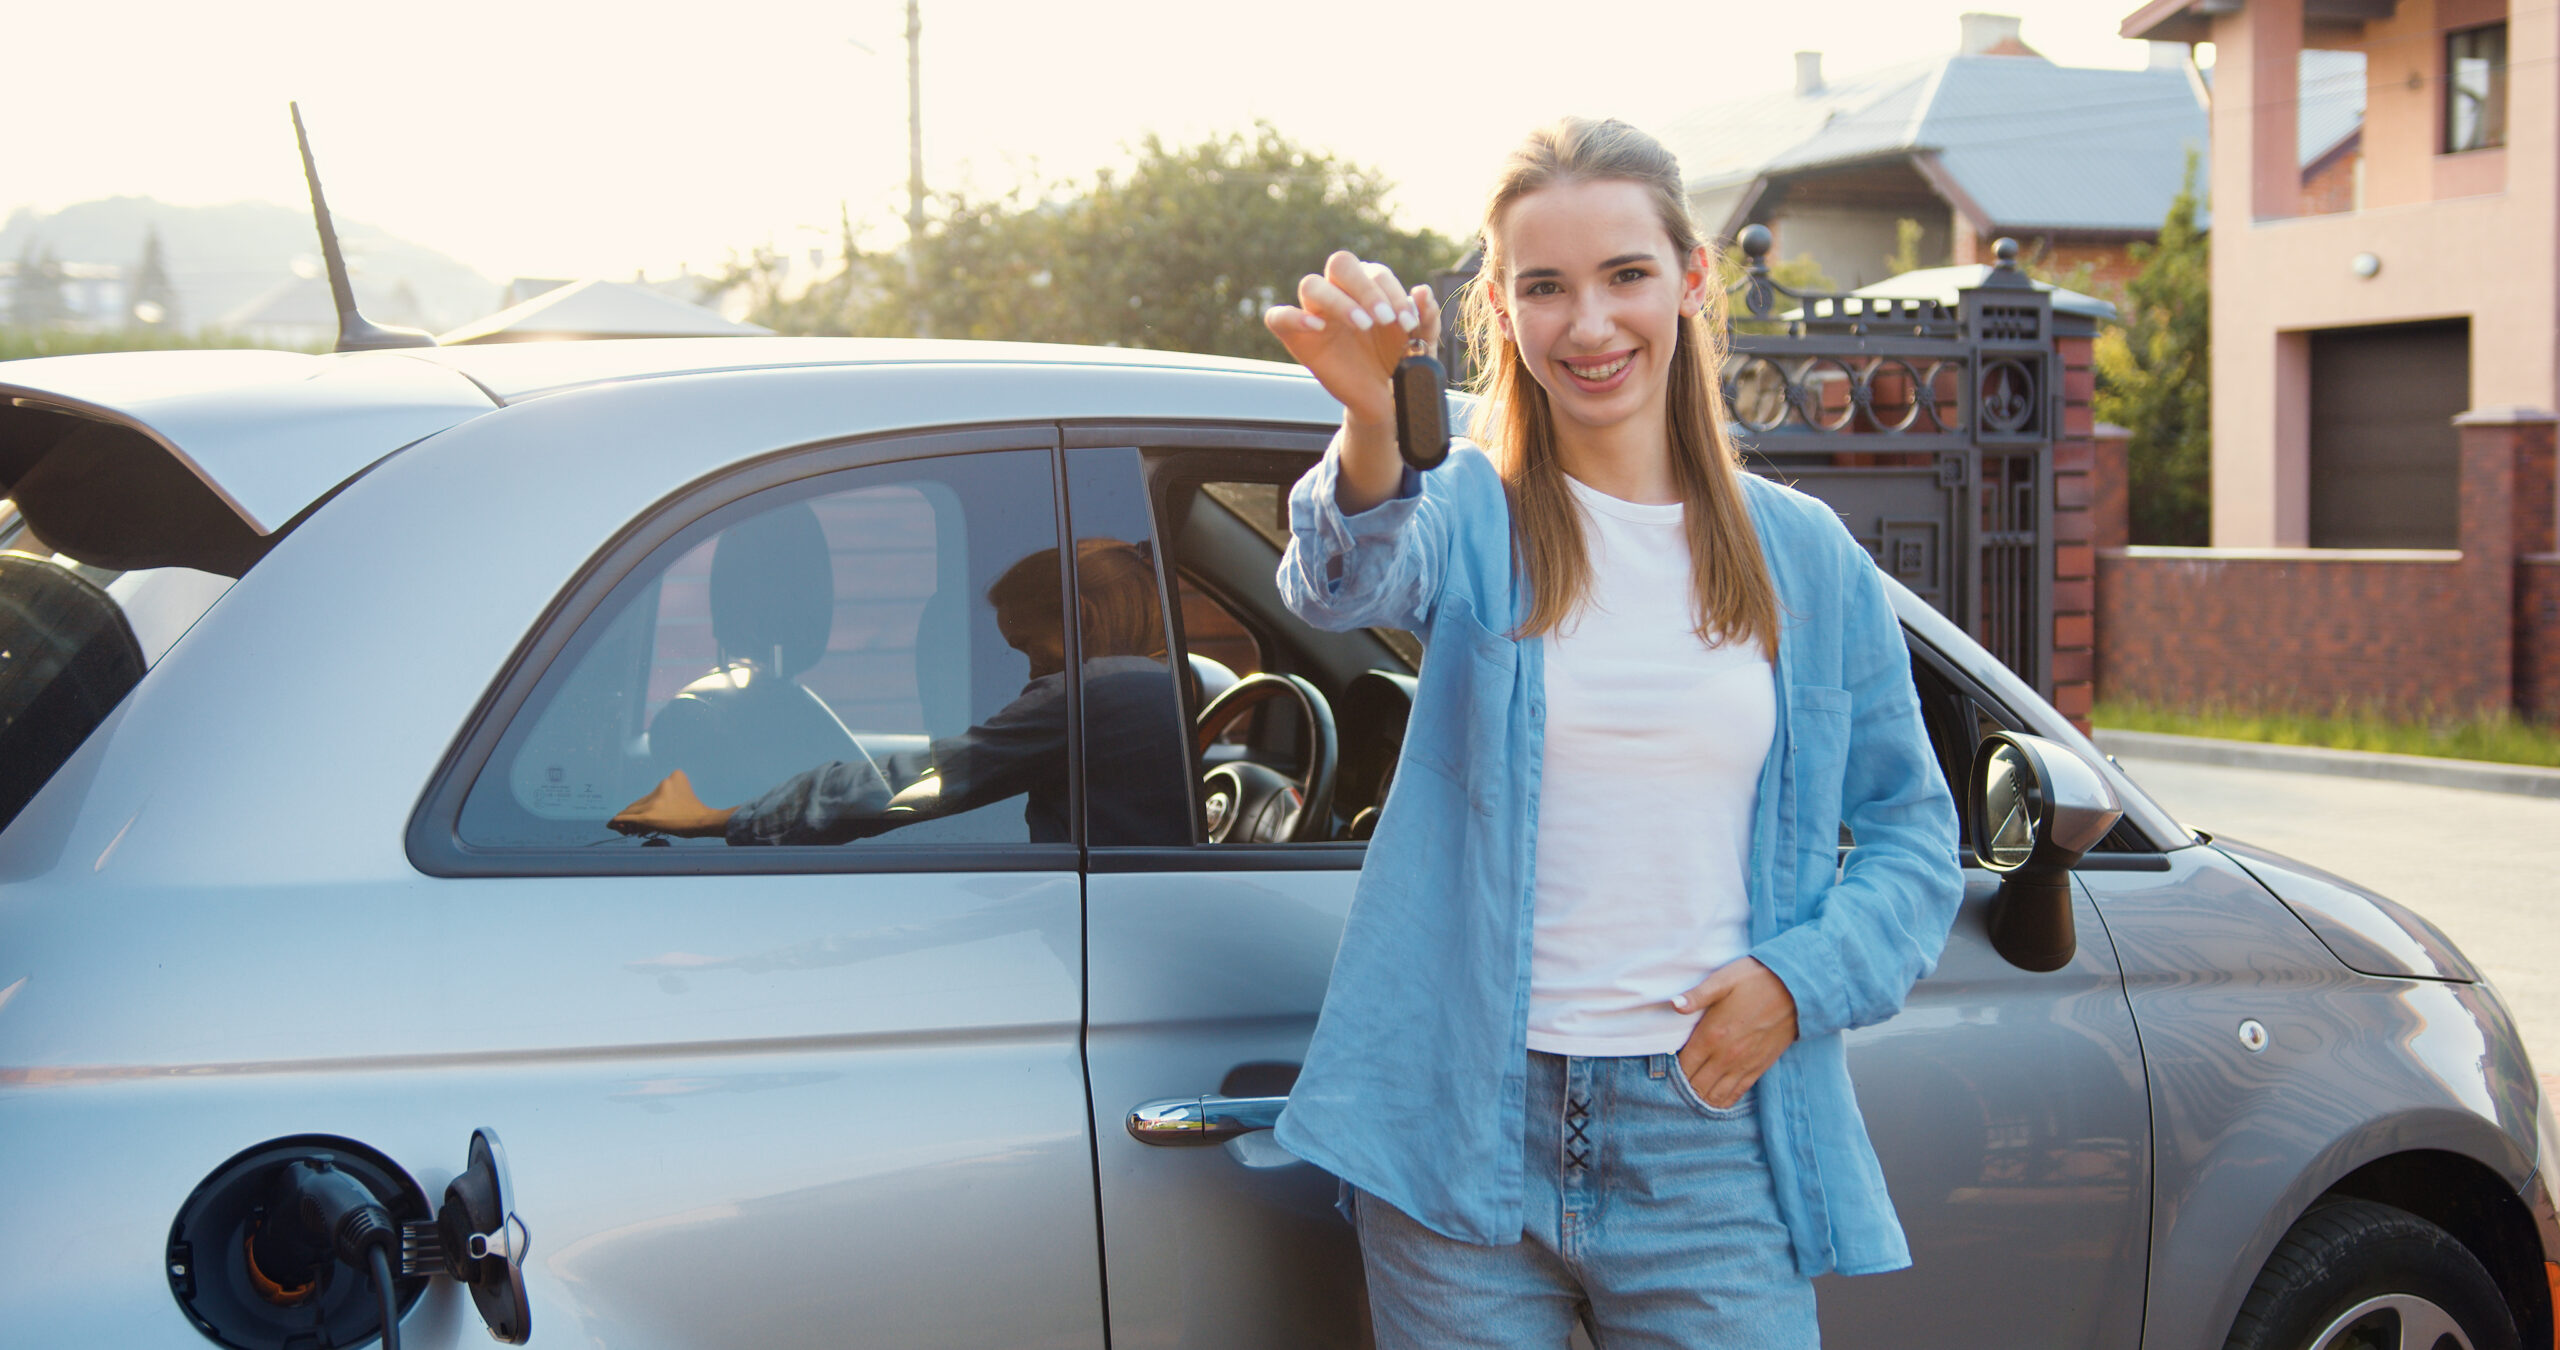 Happy woman showing keys to her new fuel efficient car